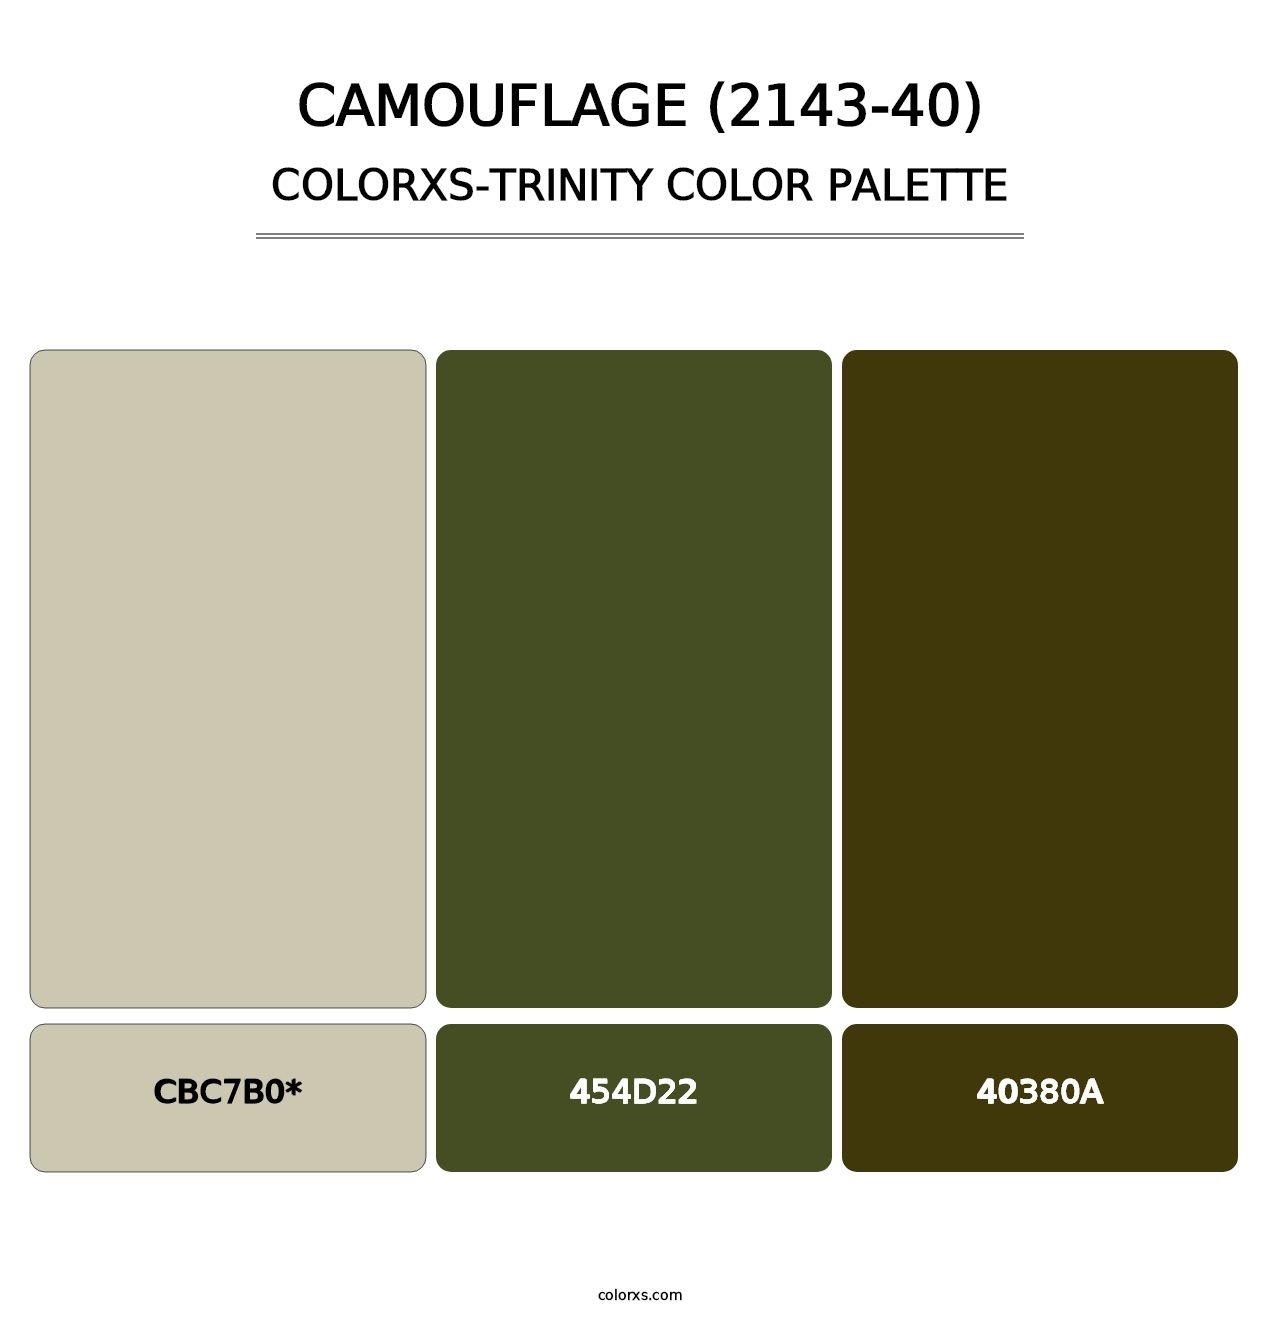 Camouflage (2143-40) - Colorxs Trinity Palette